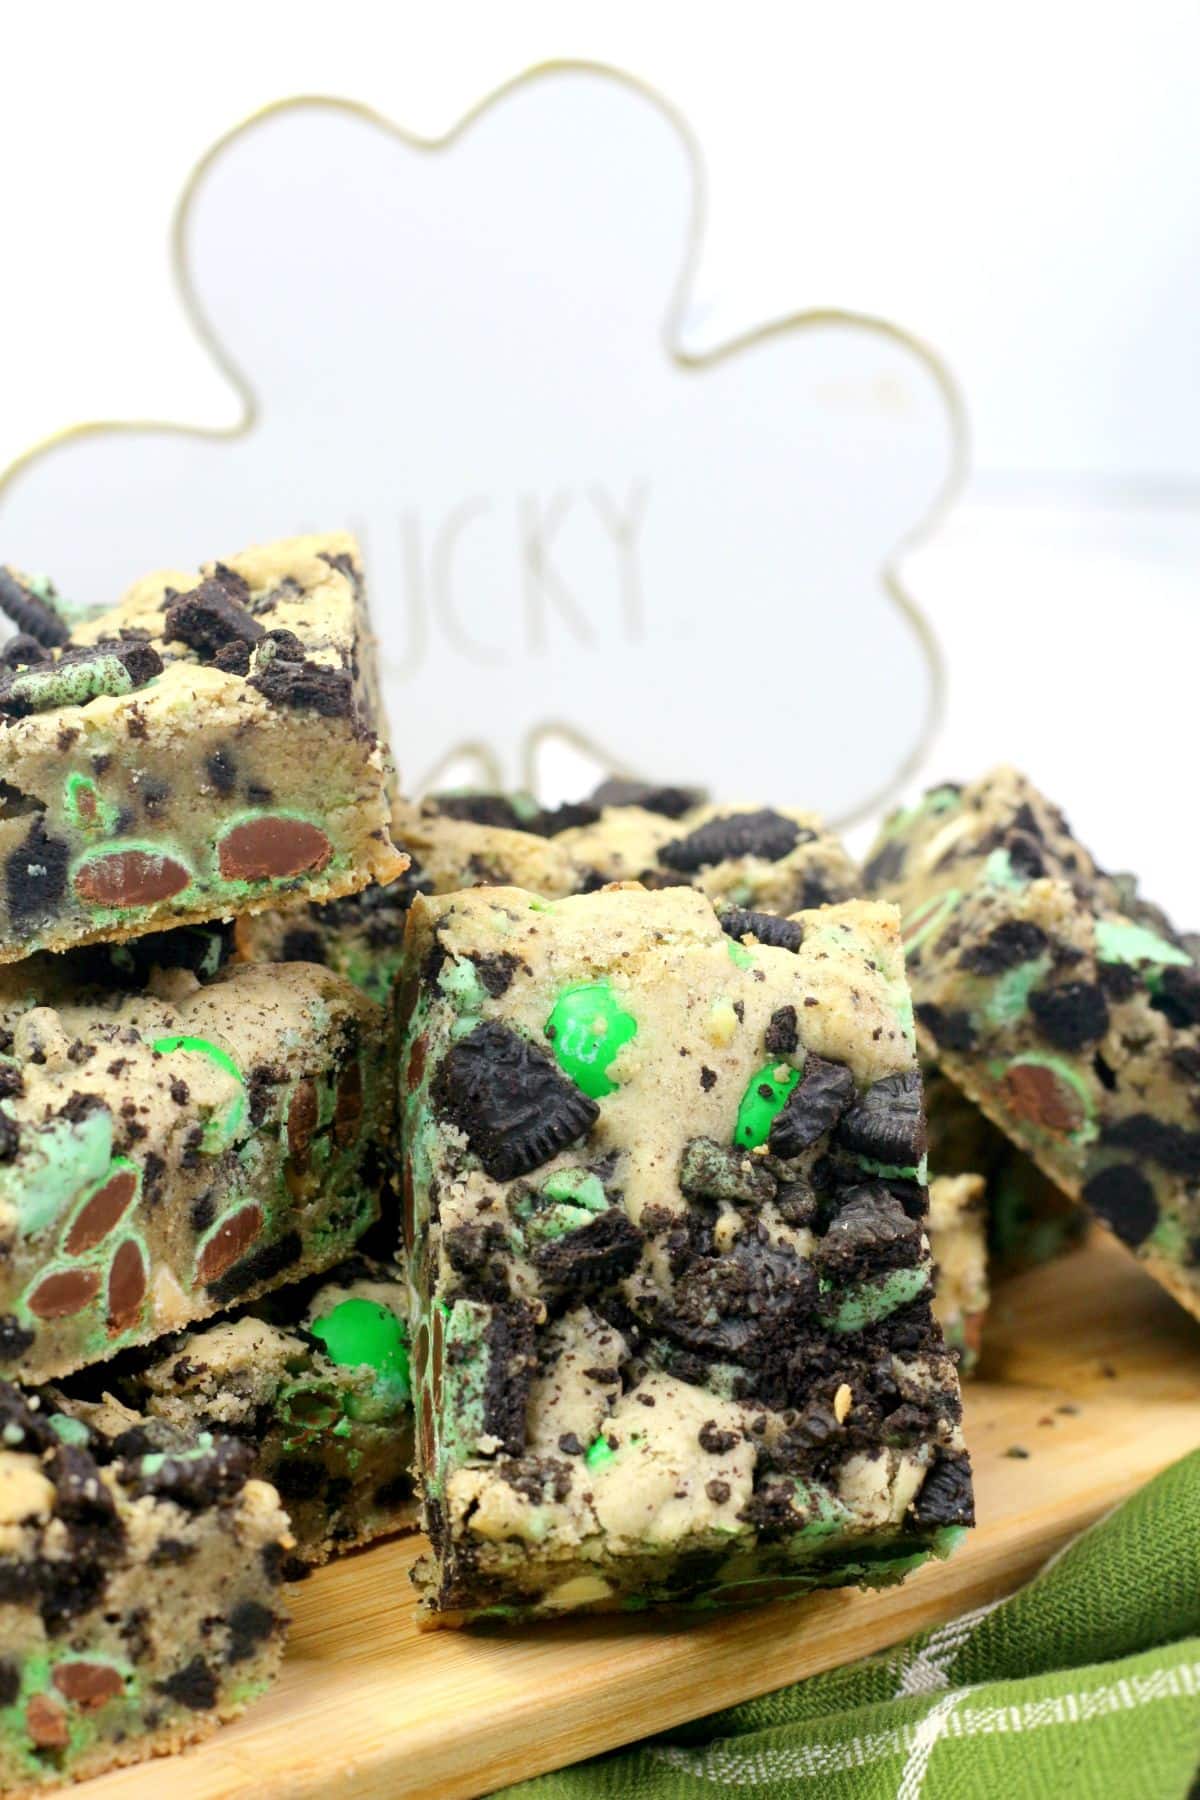 Cookie bars sit on a wooden board, surrounded by green cloth.